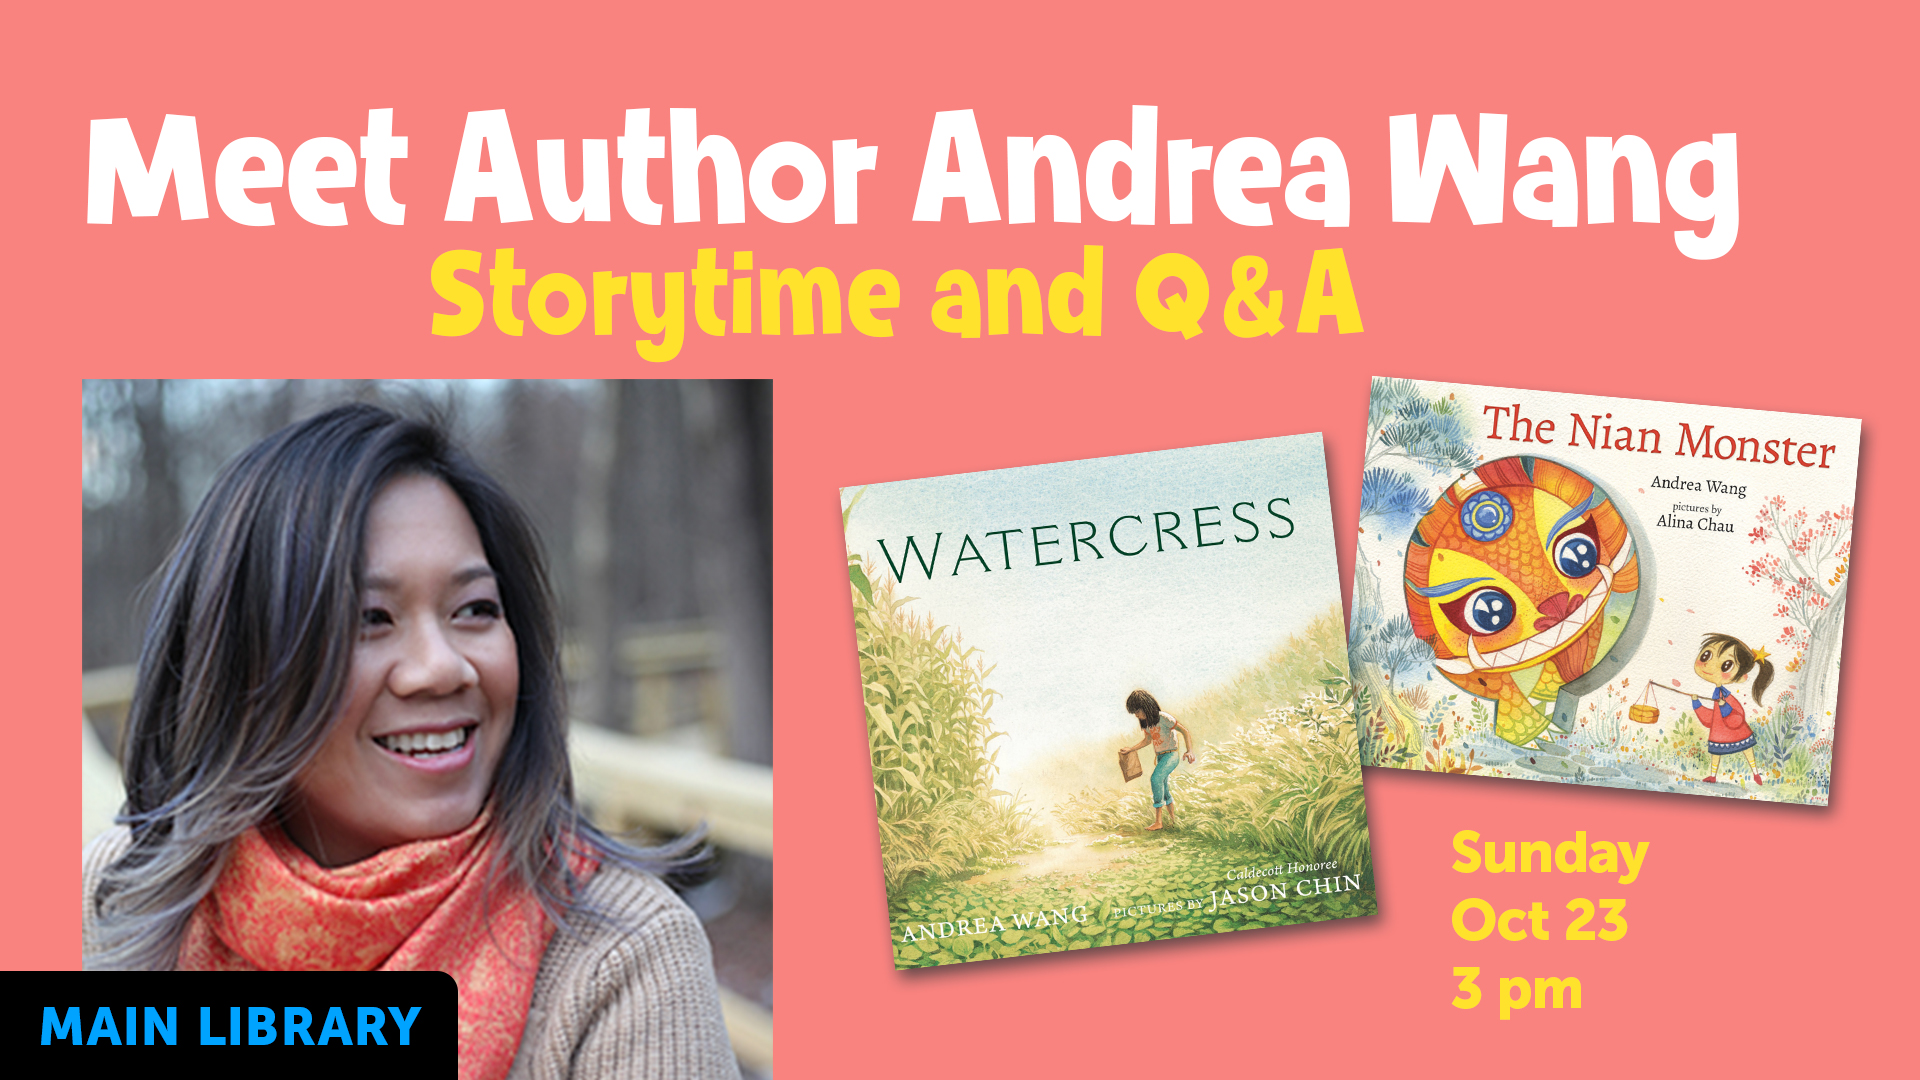 Promotional image for Meet Author Andrea Wang